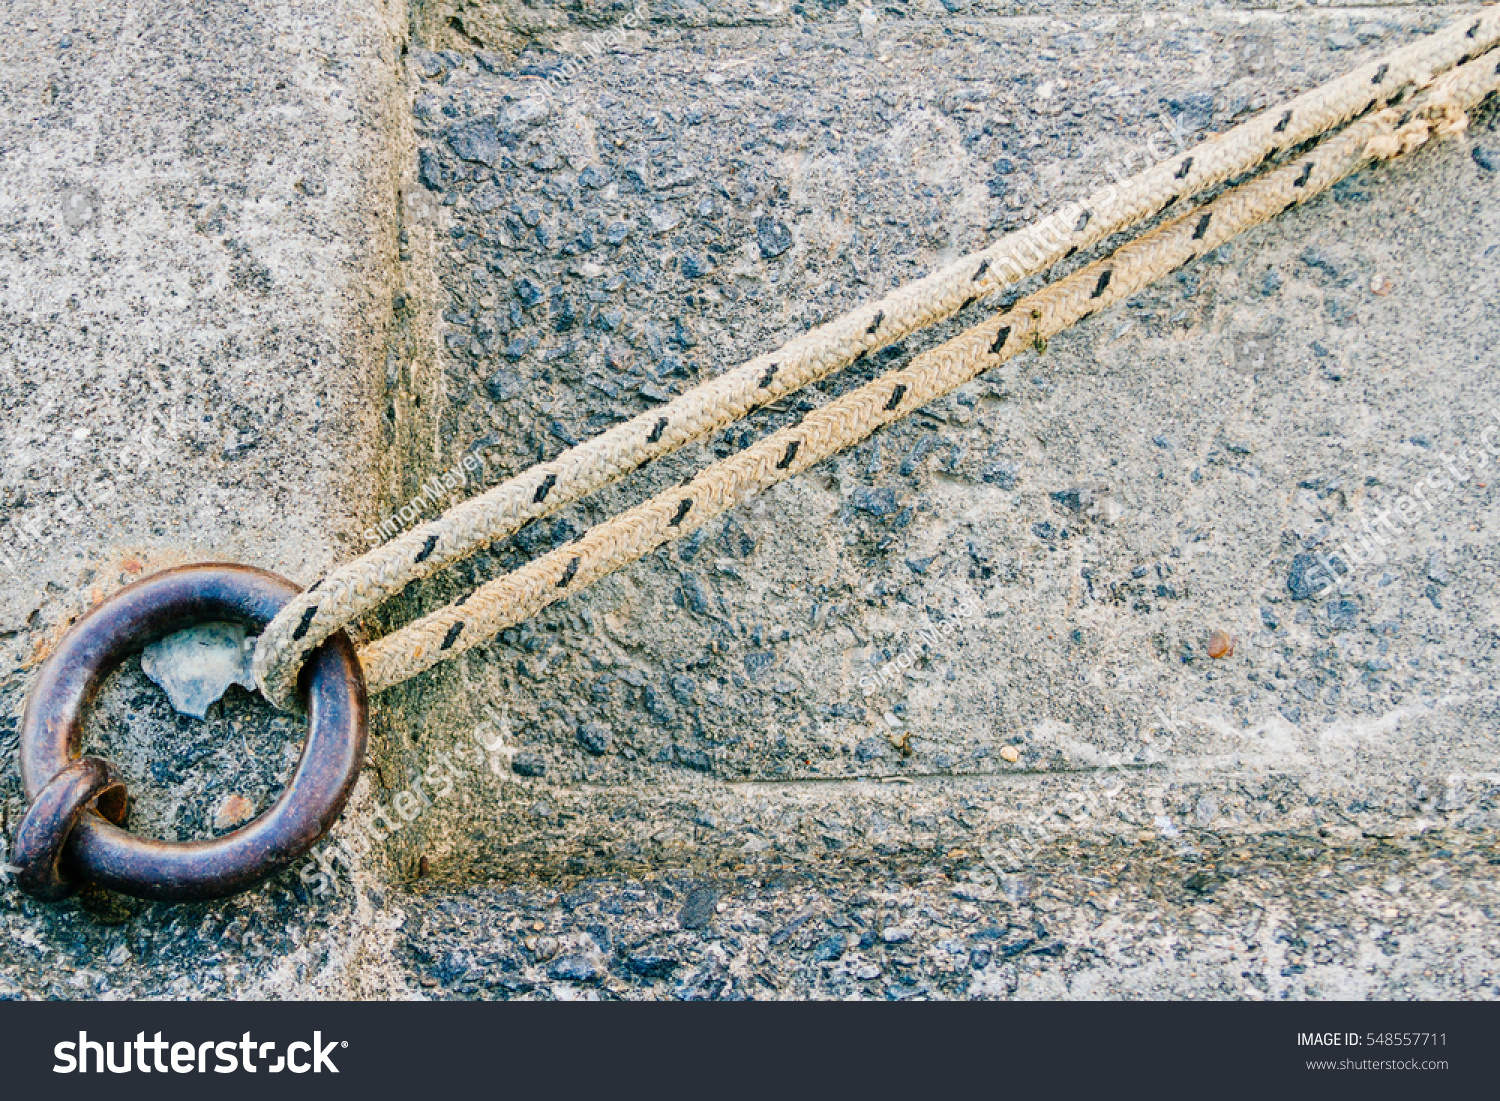 Iron ring with rope tied and concrete background on a dock #548557711